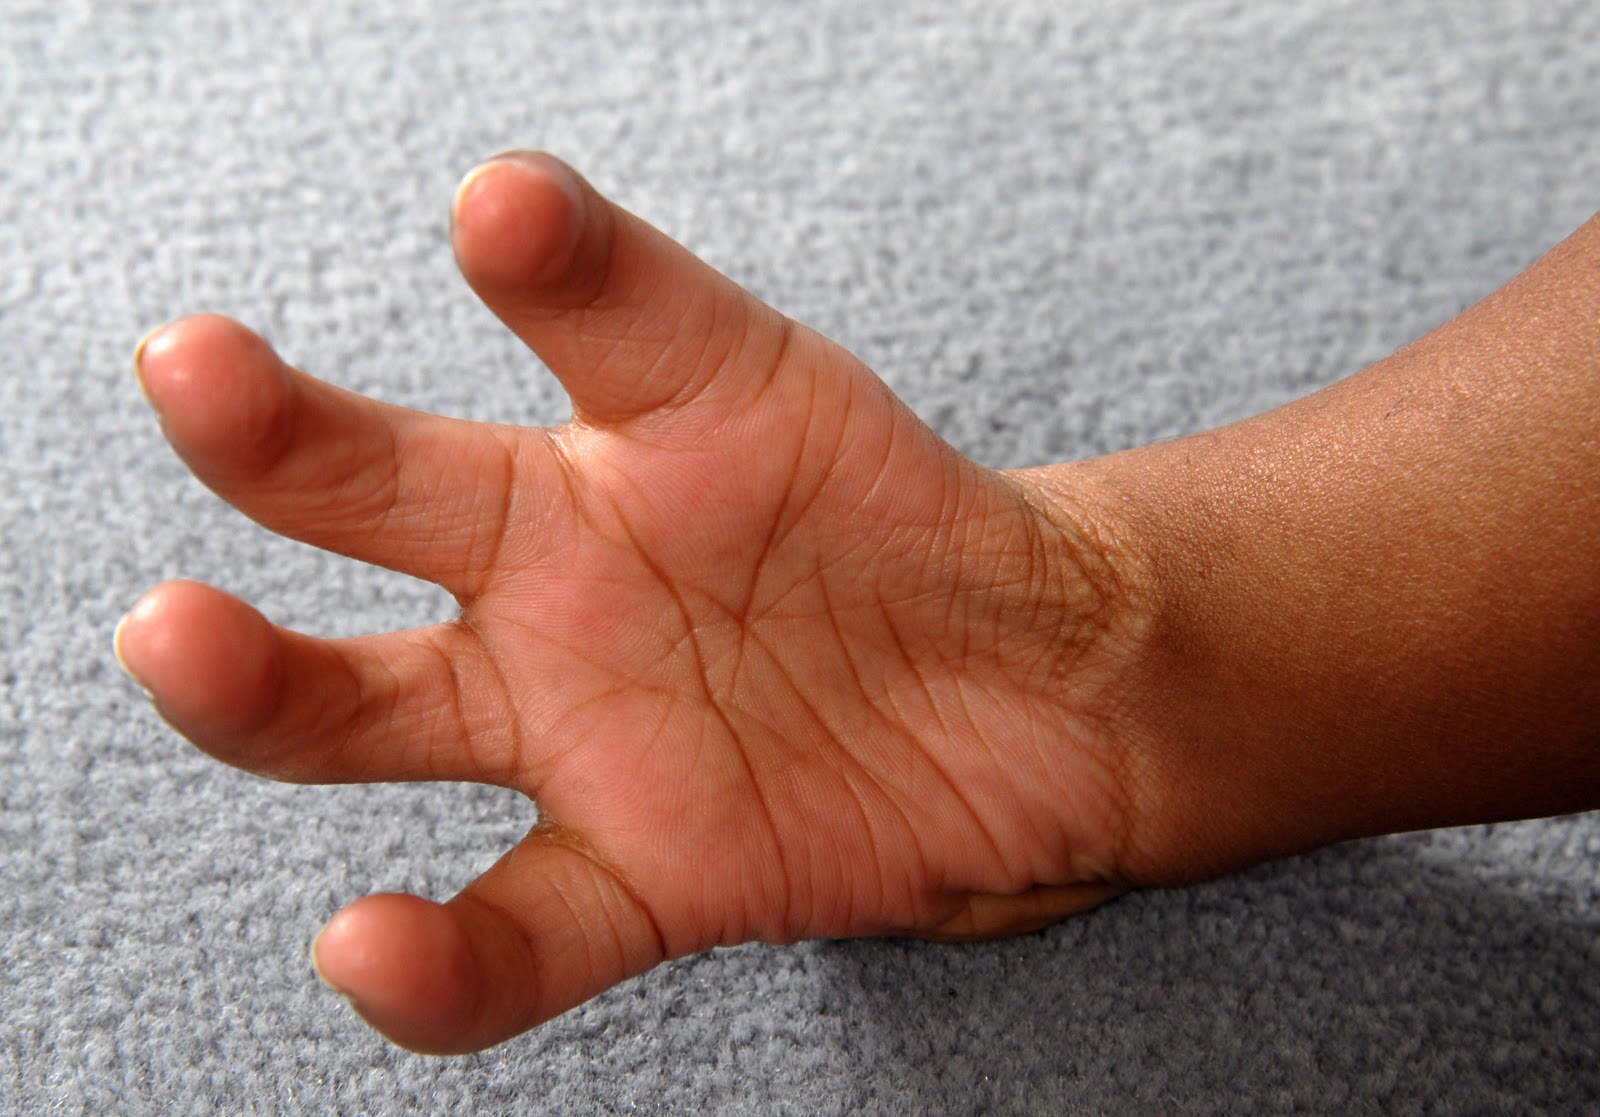 Congenital Hand and Arm Differences: July 2012